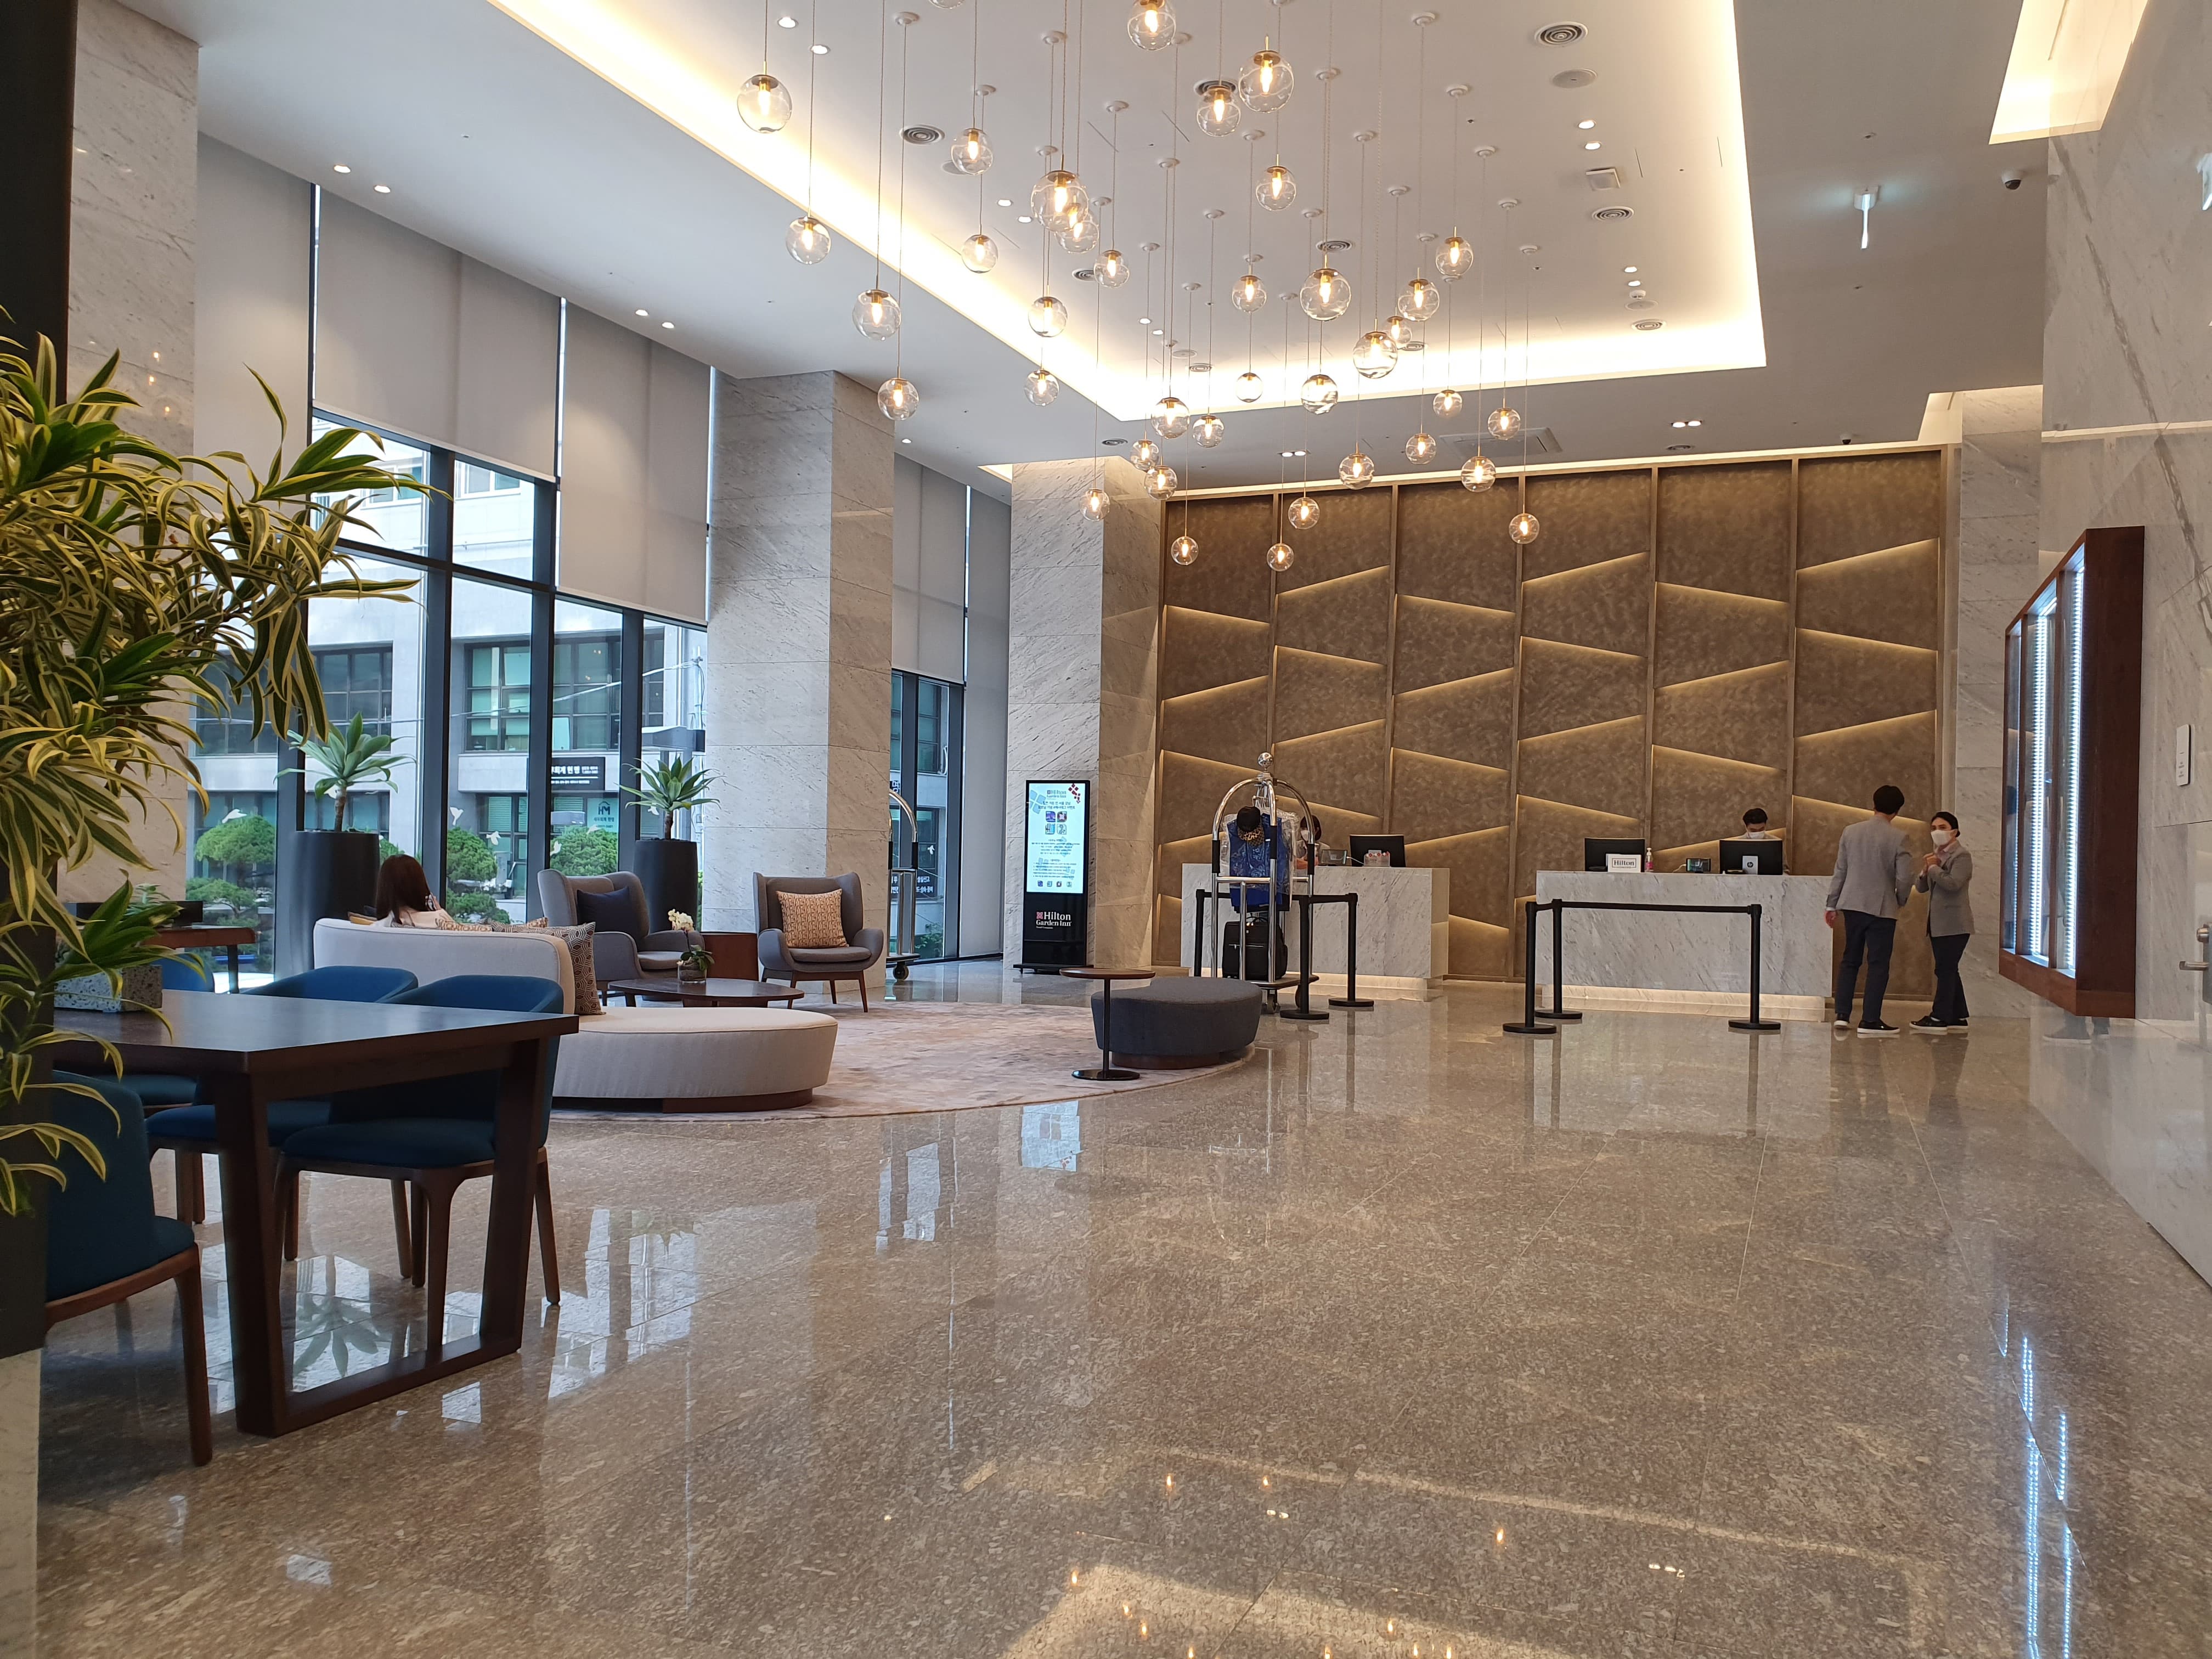 Access Road/ Main Entrance0 : Elegant hotel lobby with high ceilings and lots of lighting